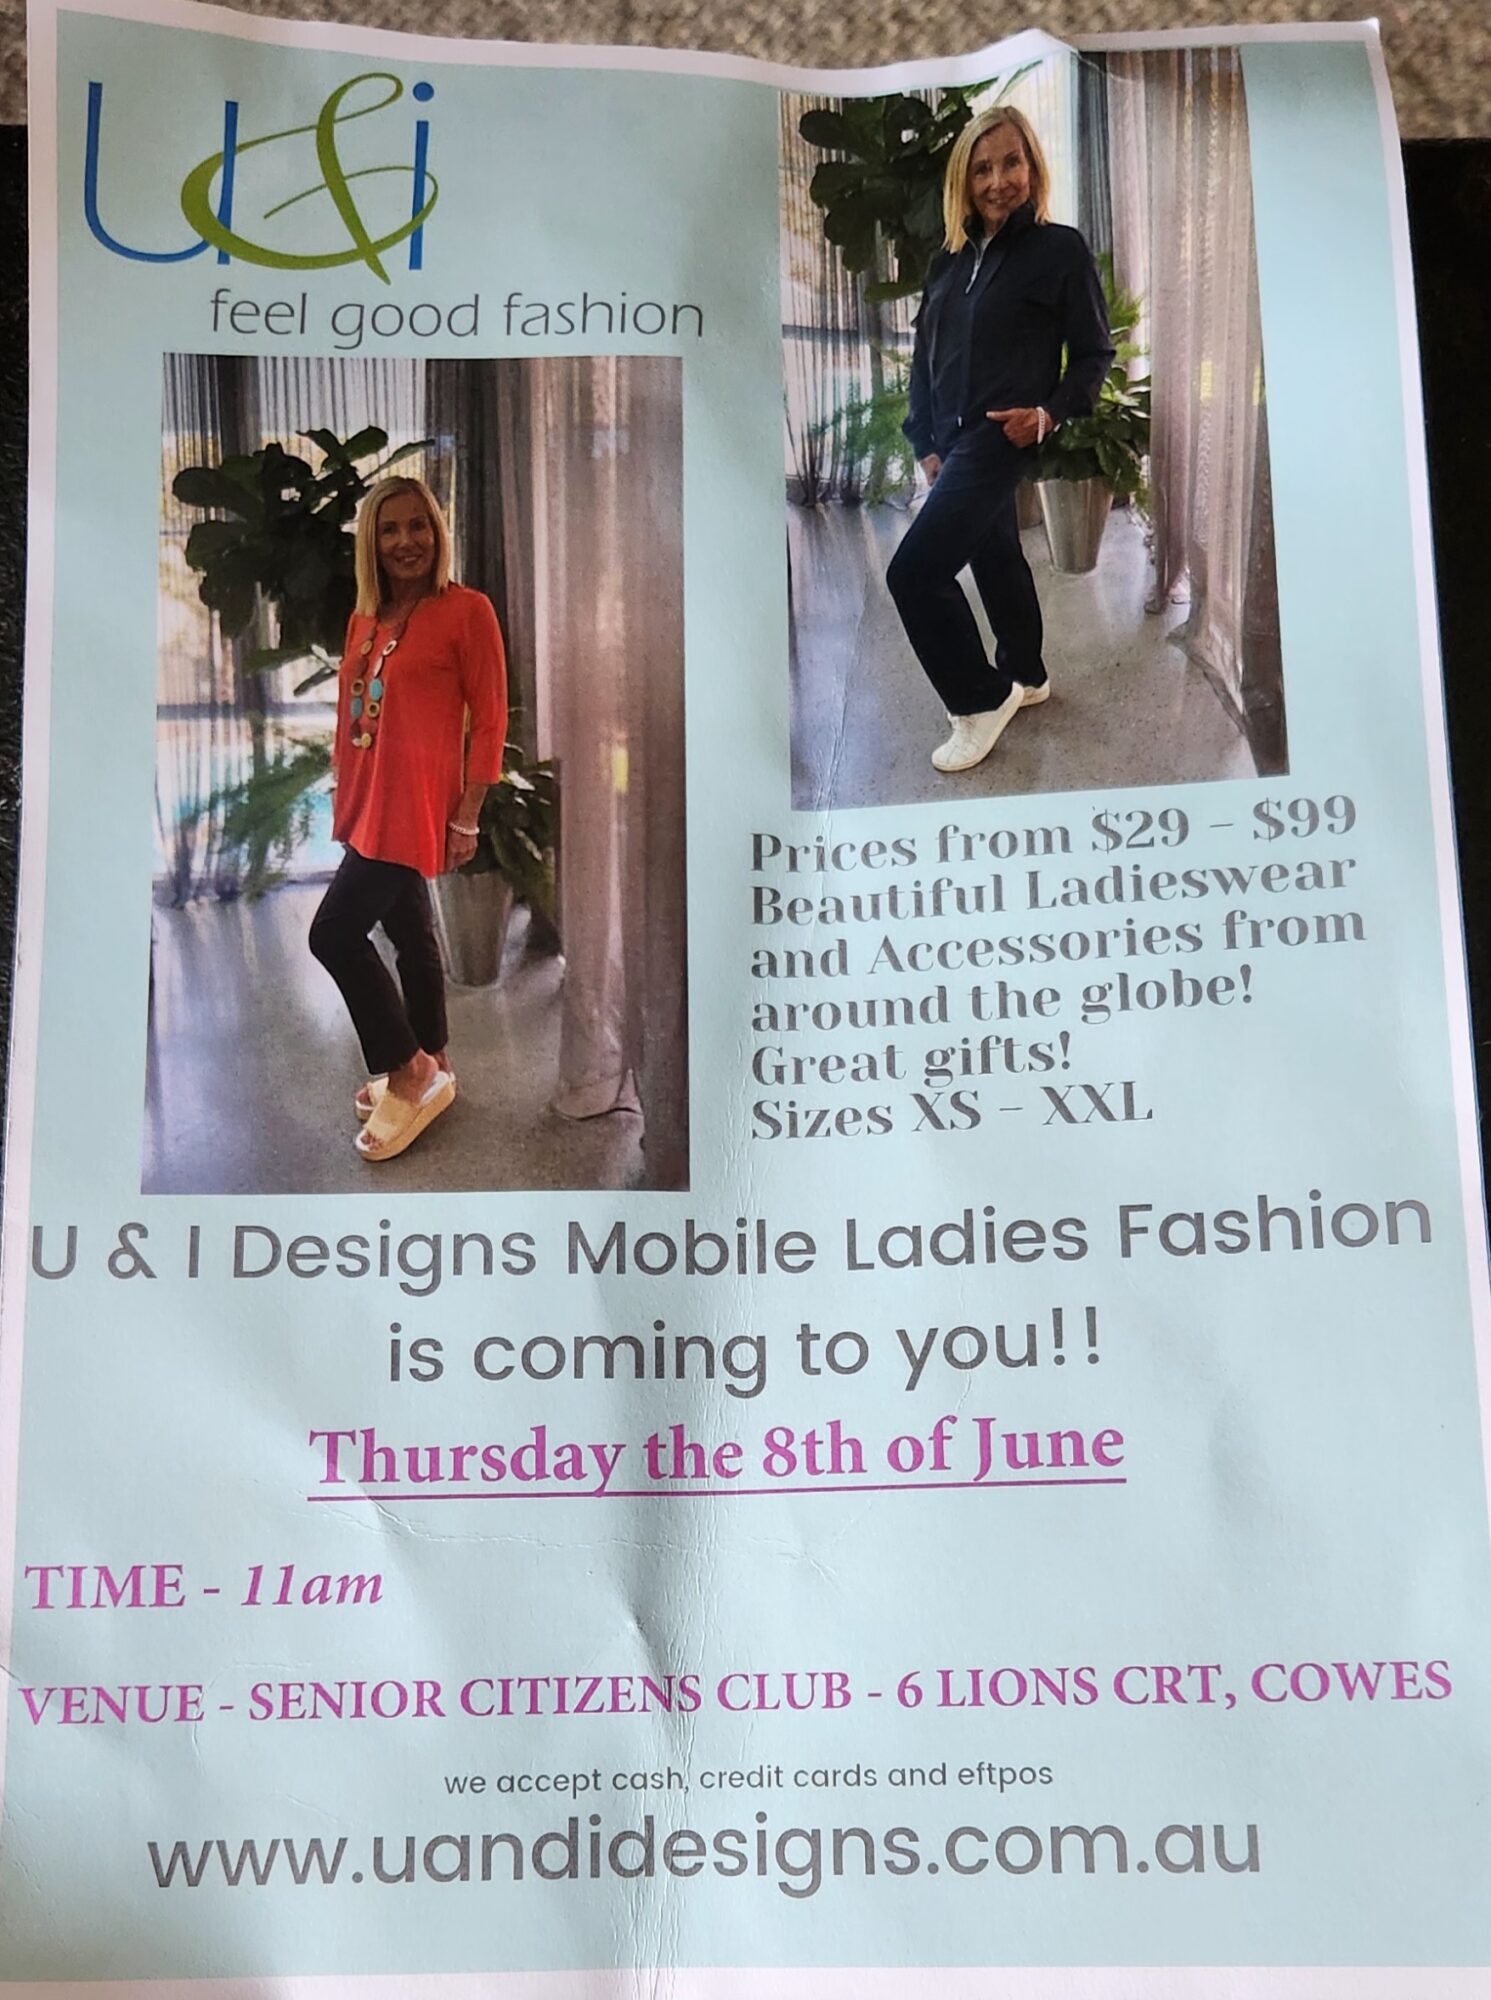 Phillip Island Senior Citizens Club is hosting a fashion event.  U and I Designs will be showing their range of fashion and accessories from 11am.